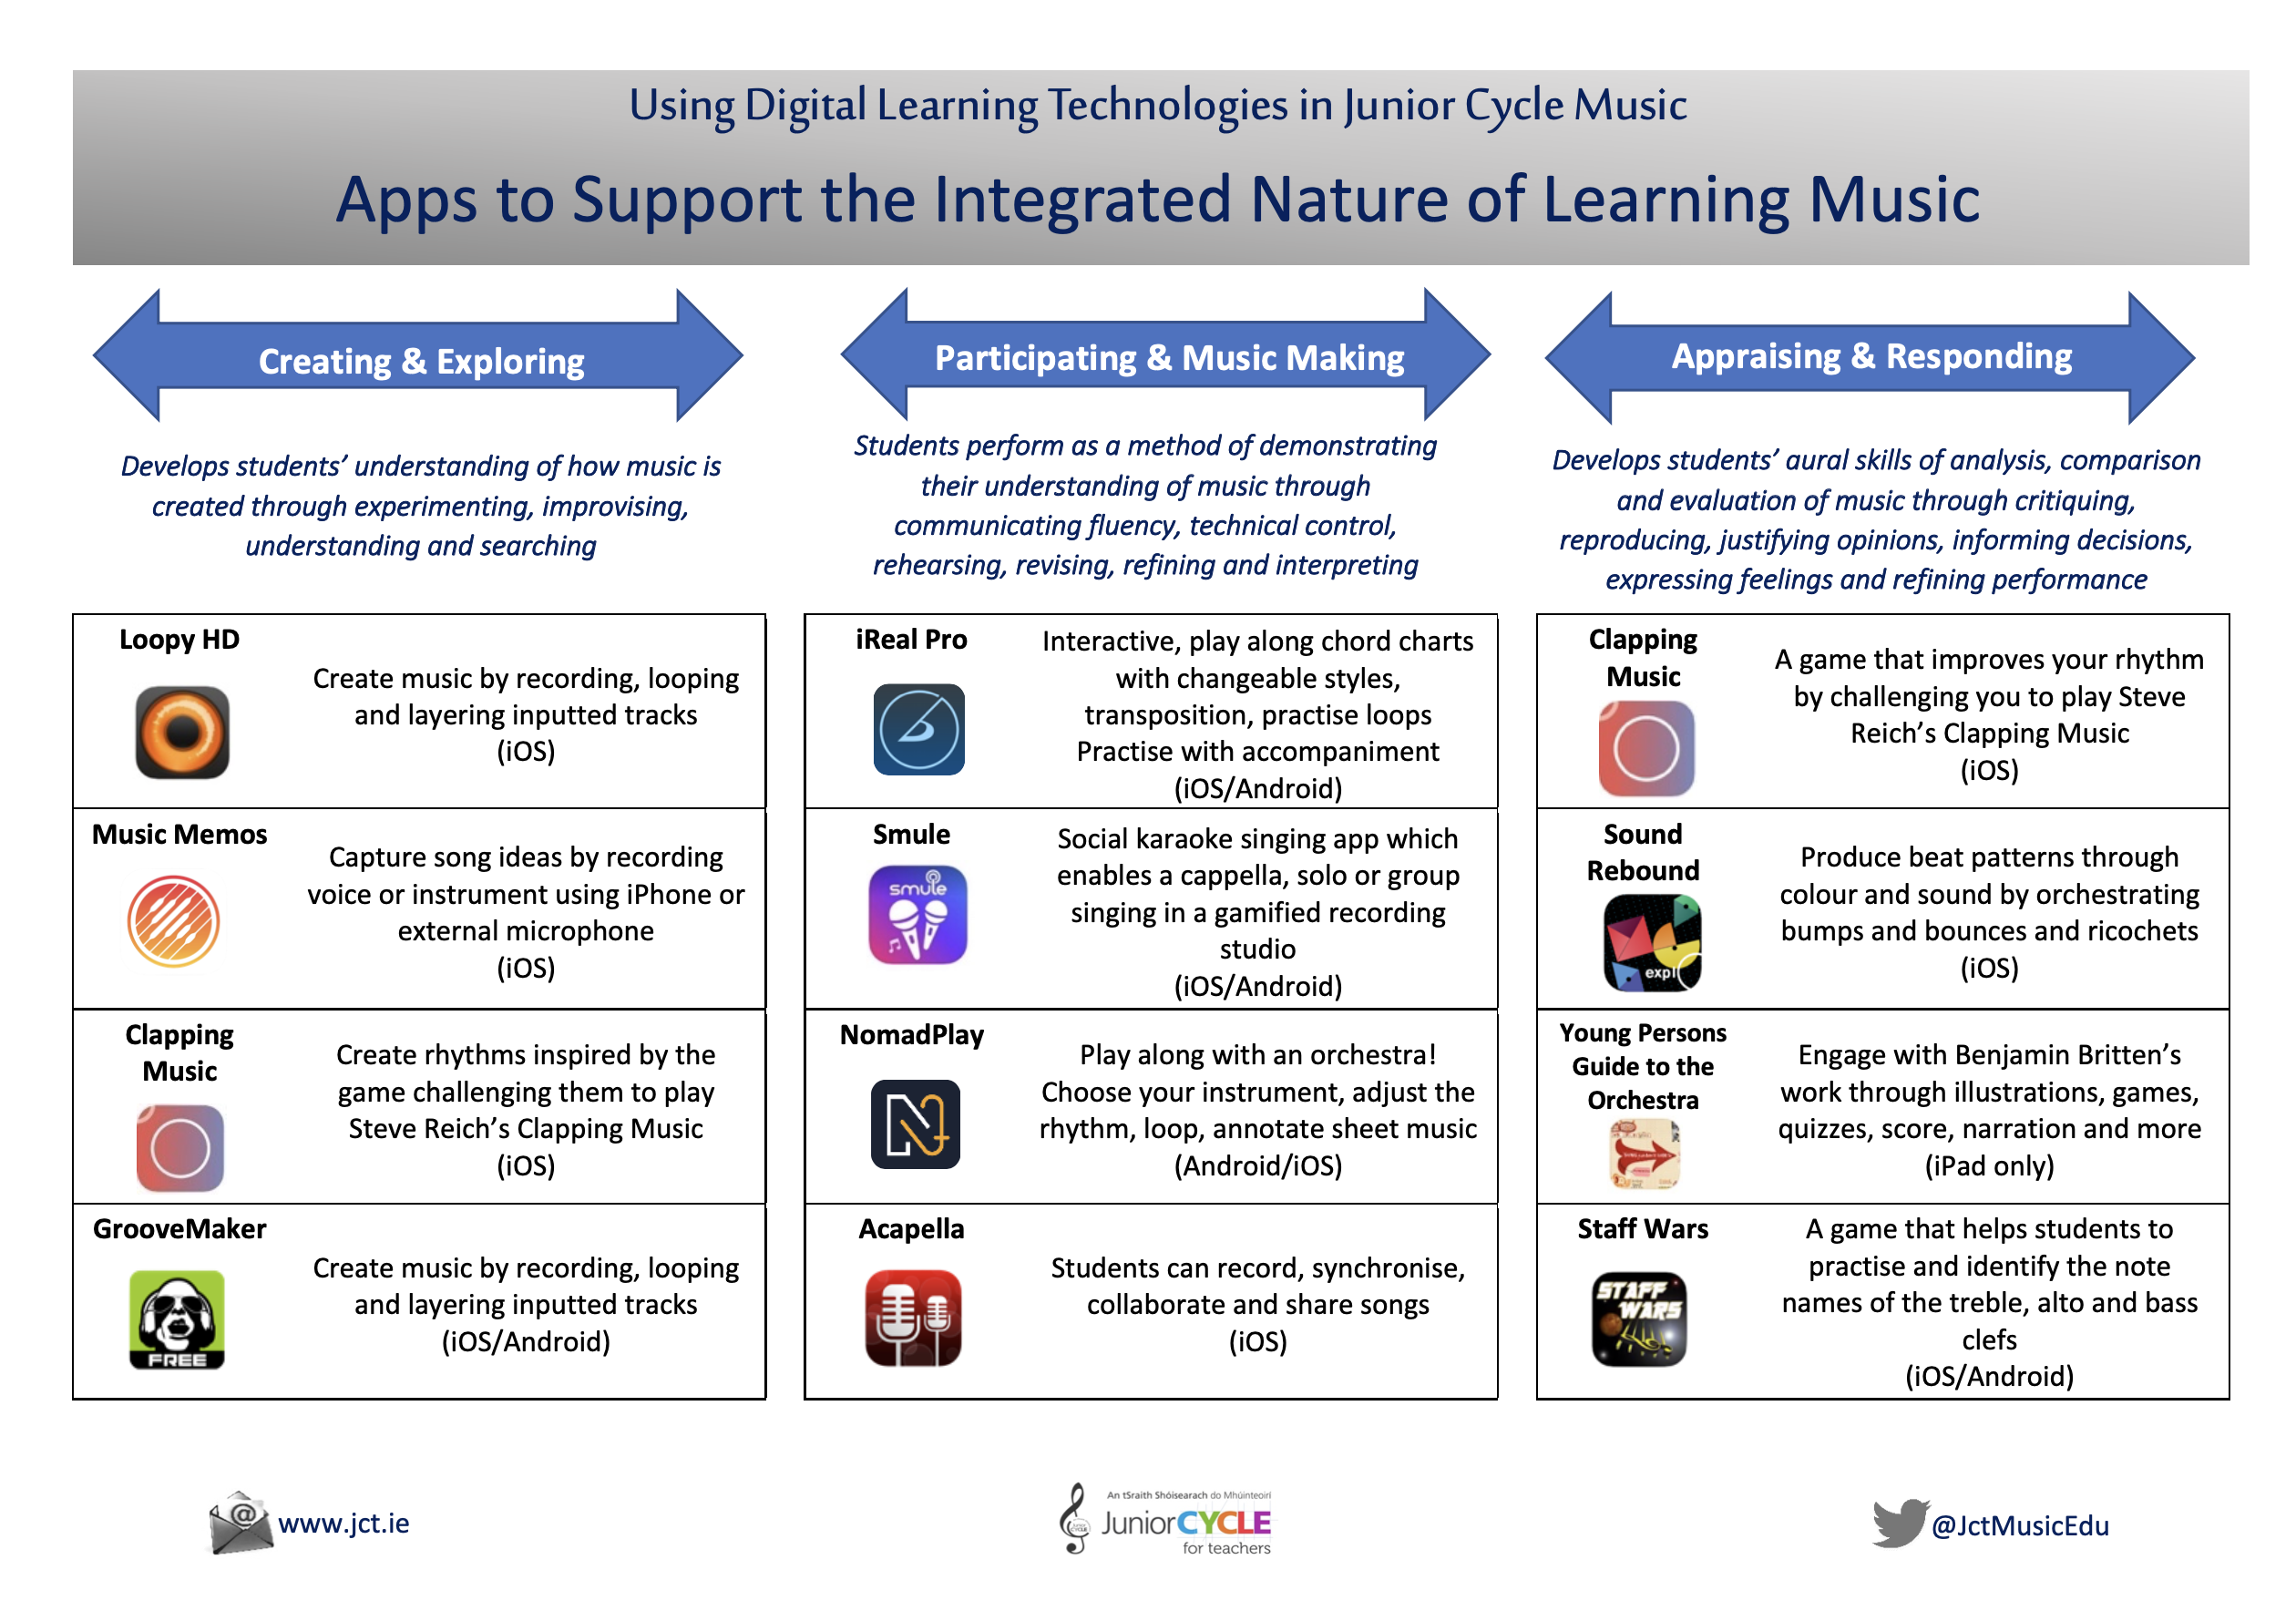 Apps to Support the Integrated Nature of Learning